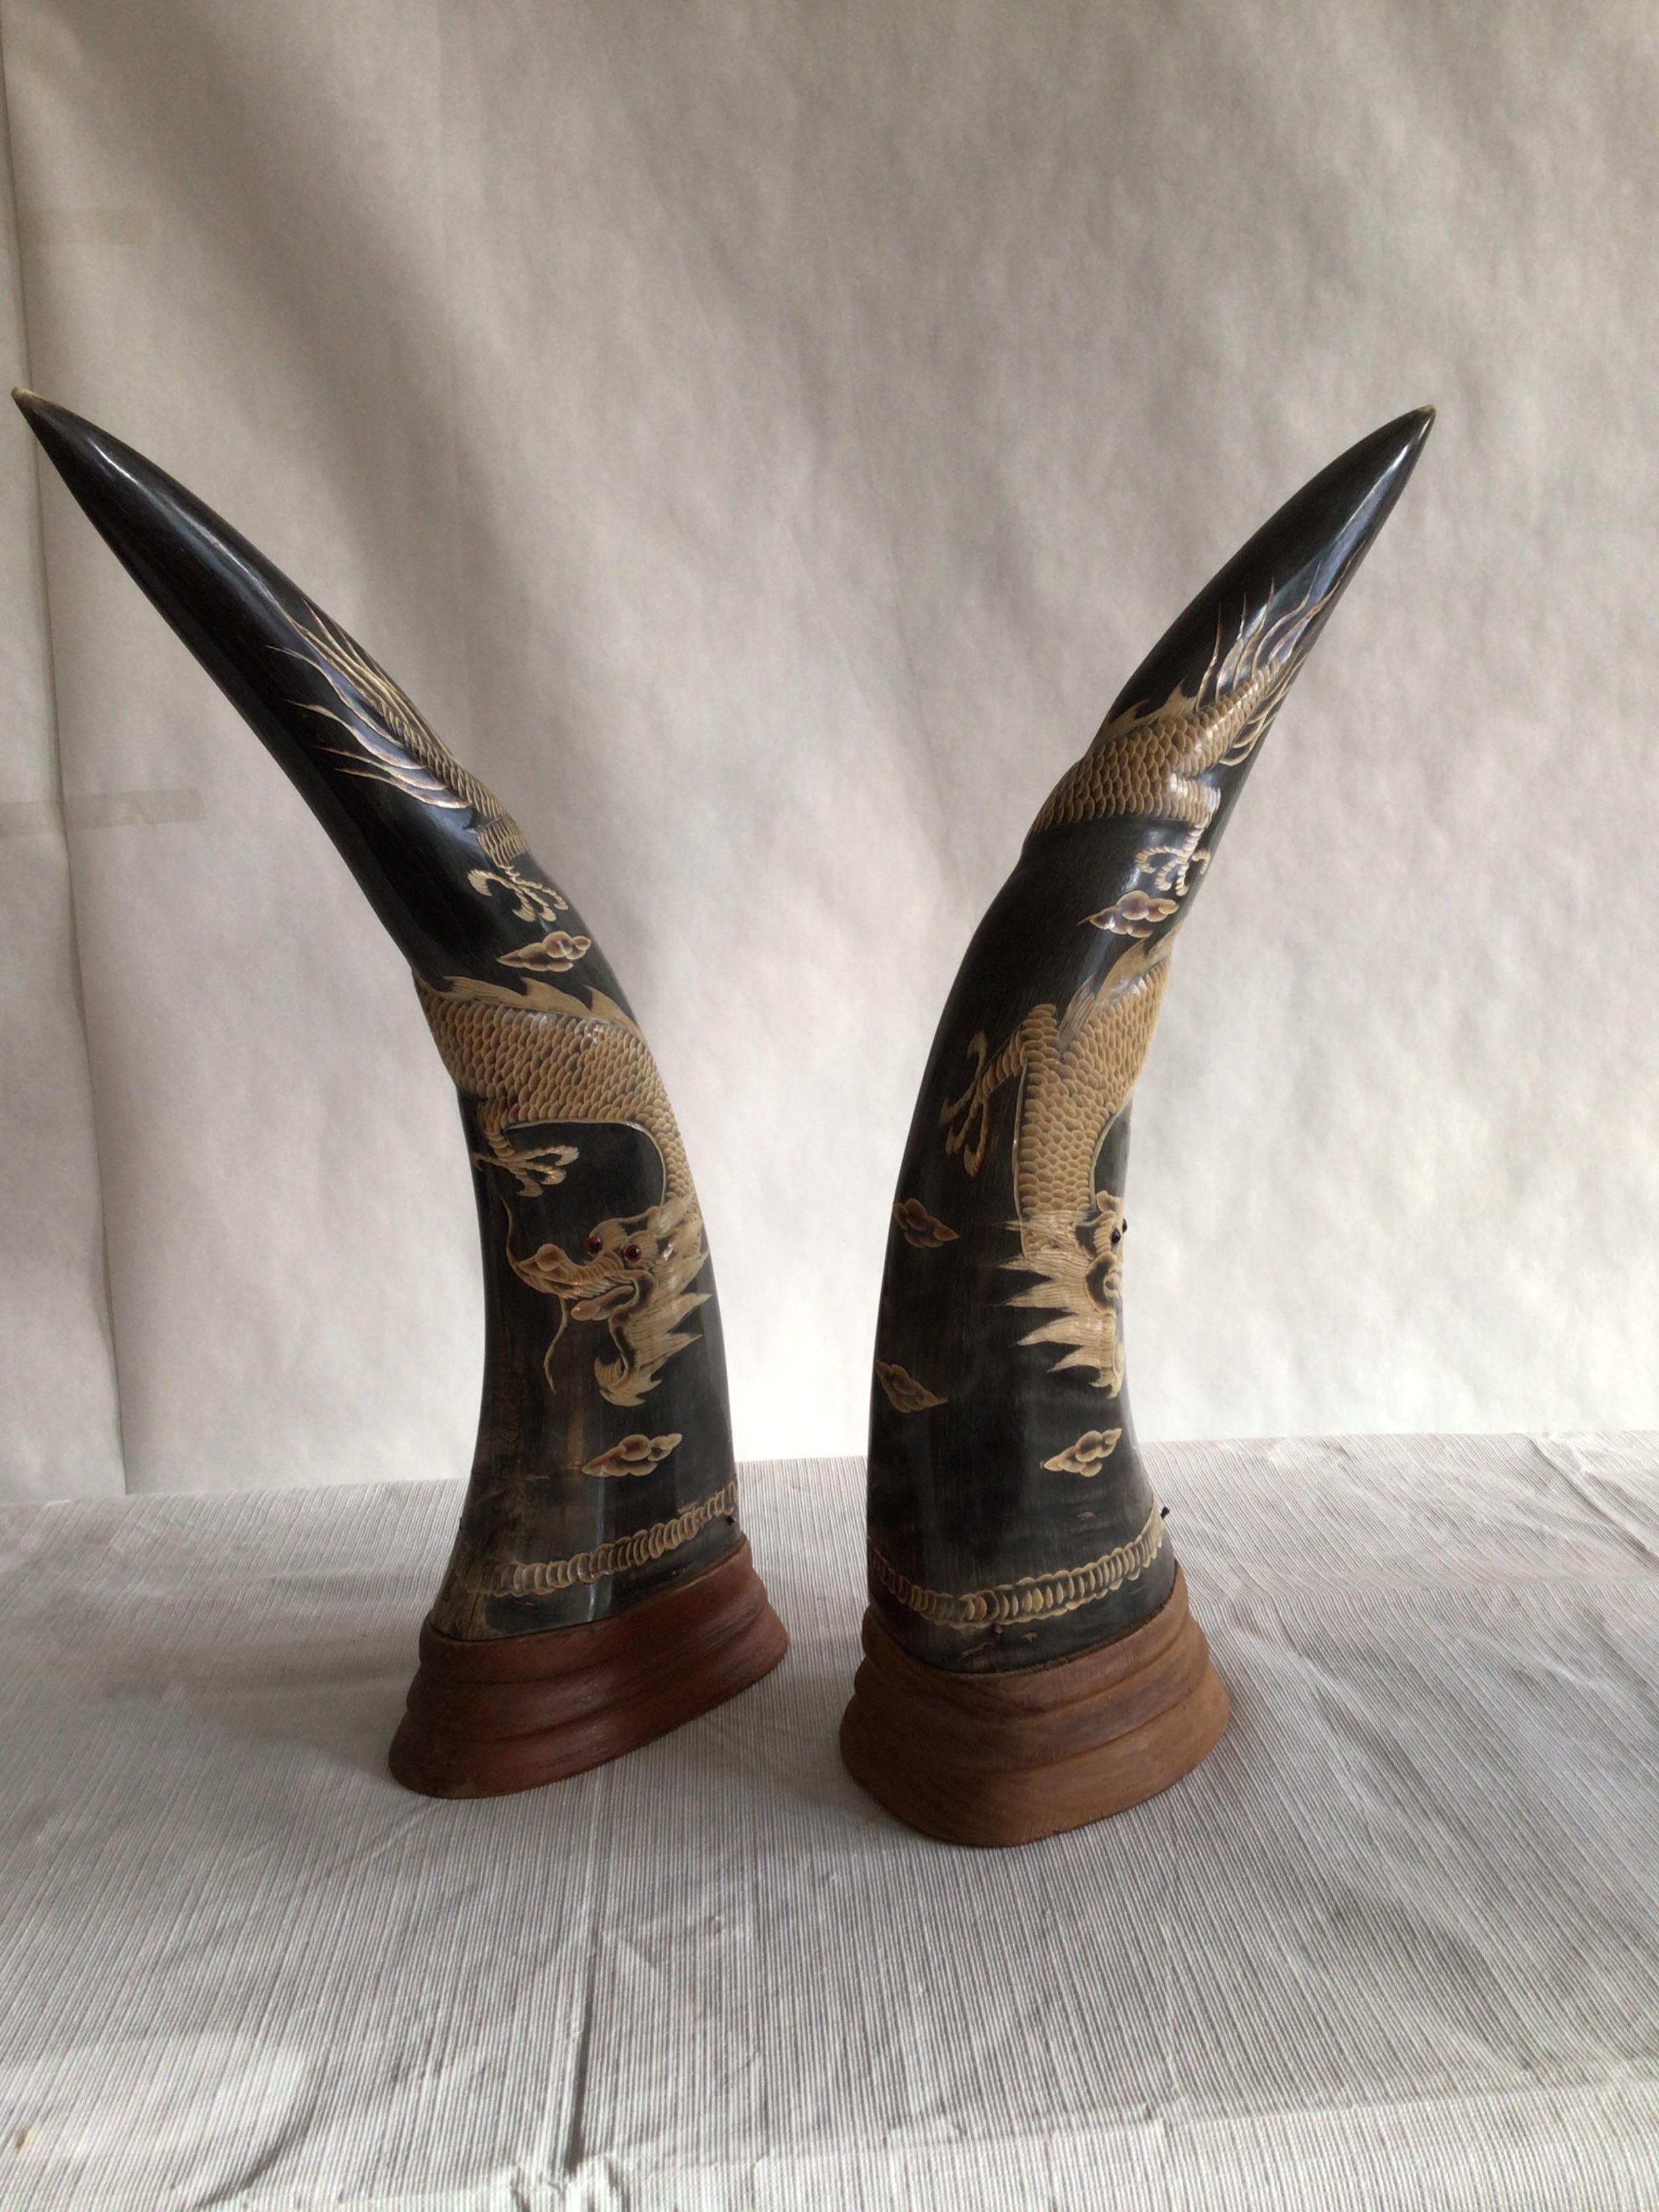 Pair of 1950s carved horns with dragon motif on wood base. 
They are a definite statement piece.